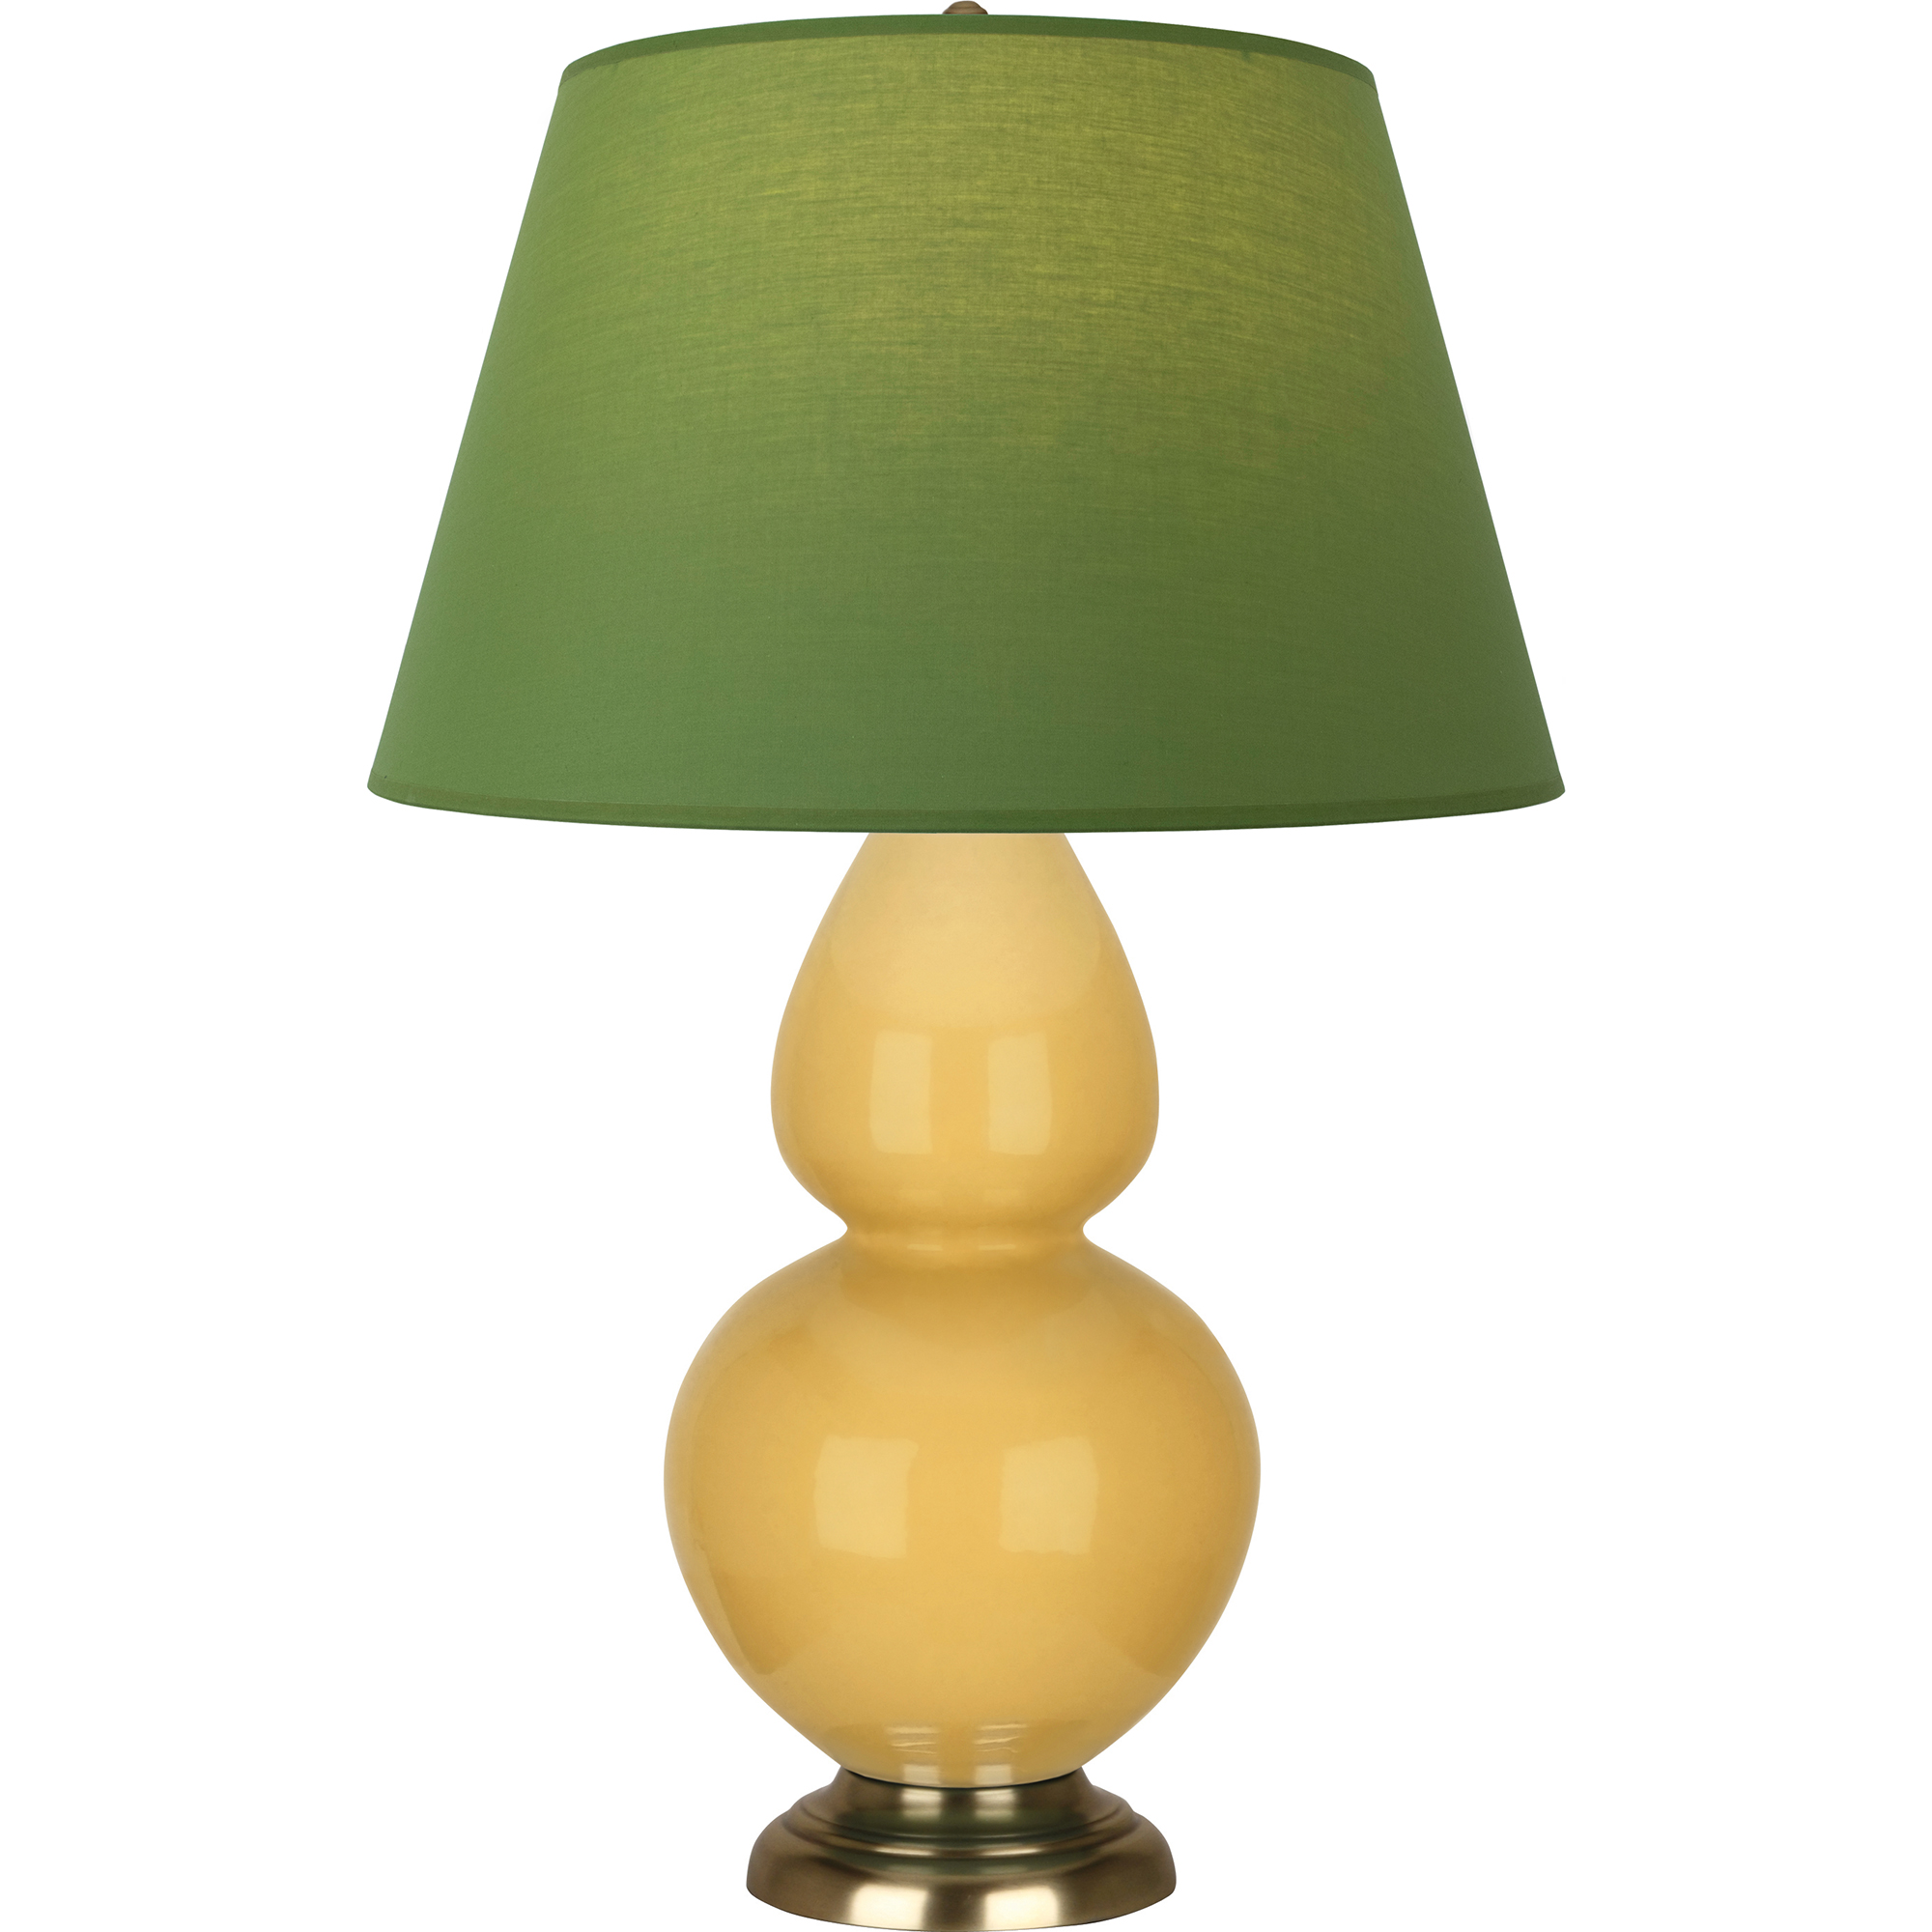 Double Gourd Table Lamp Style #SU20G